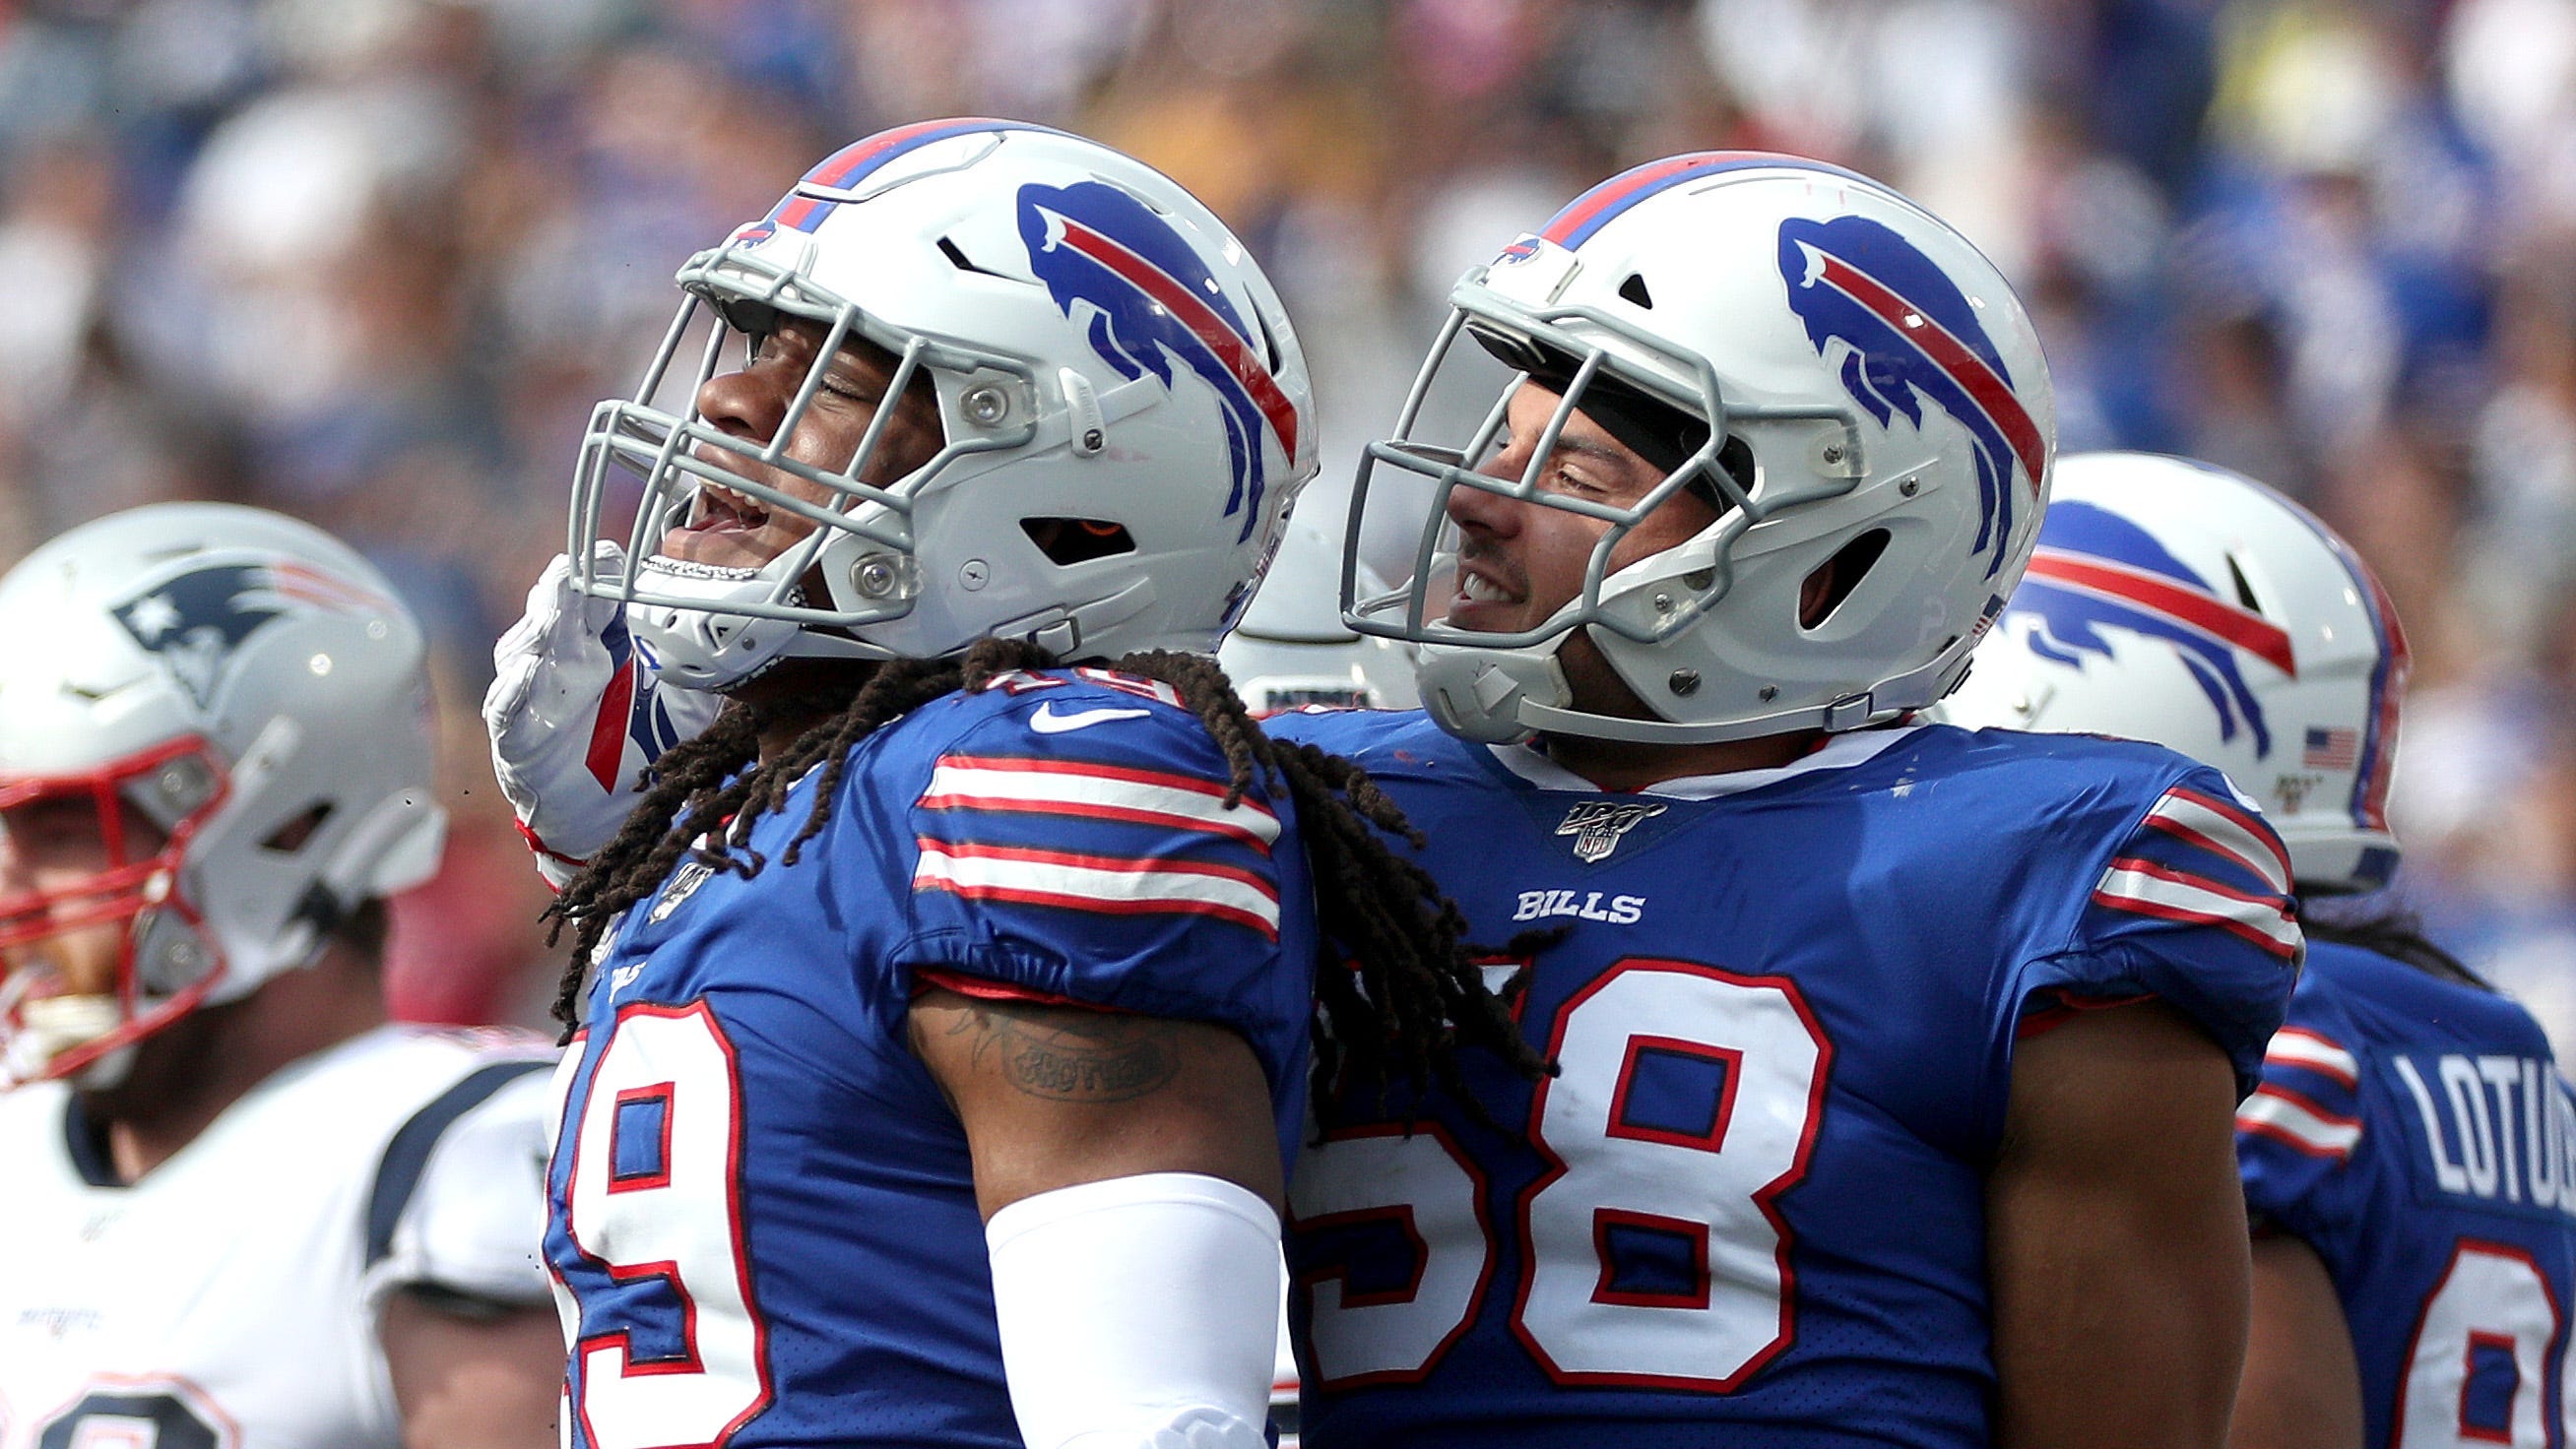 Tremaine Edmunds And Matt Milano Both Return For Bills Vs Rams - roblox thrive to survive the disasters